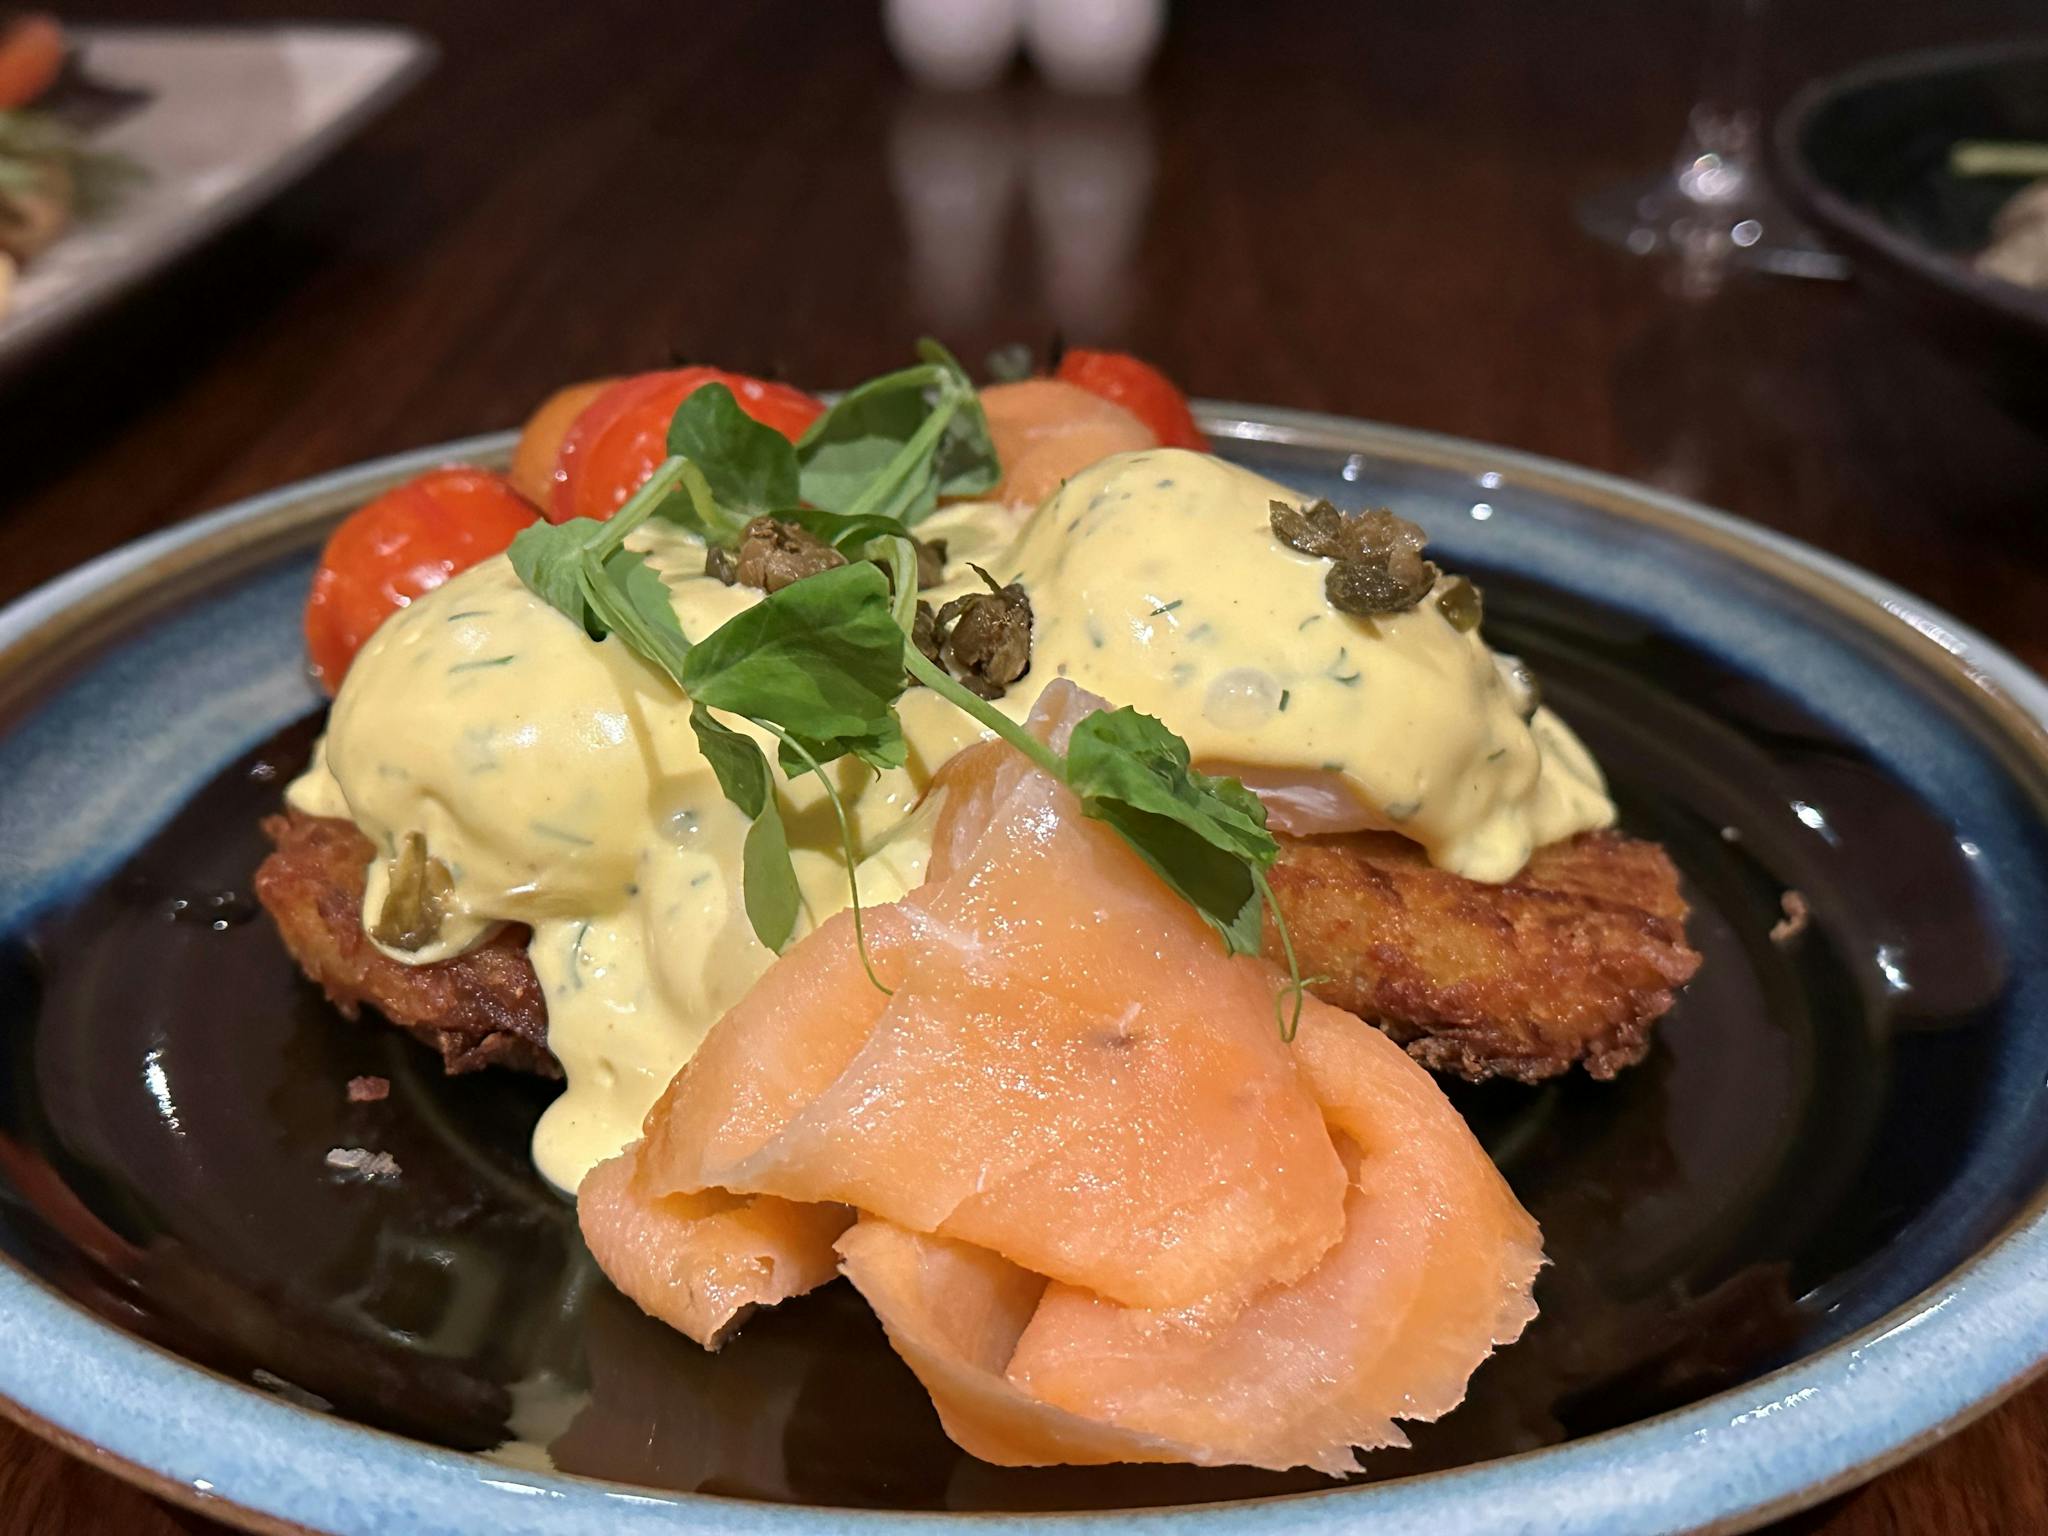 The Oak View Restaurant - smoked salmon, eggs hash browns